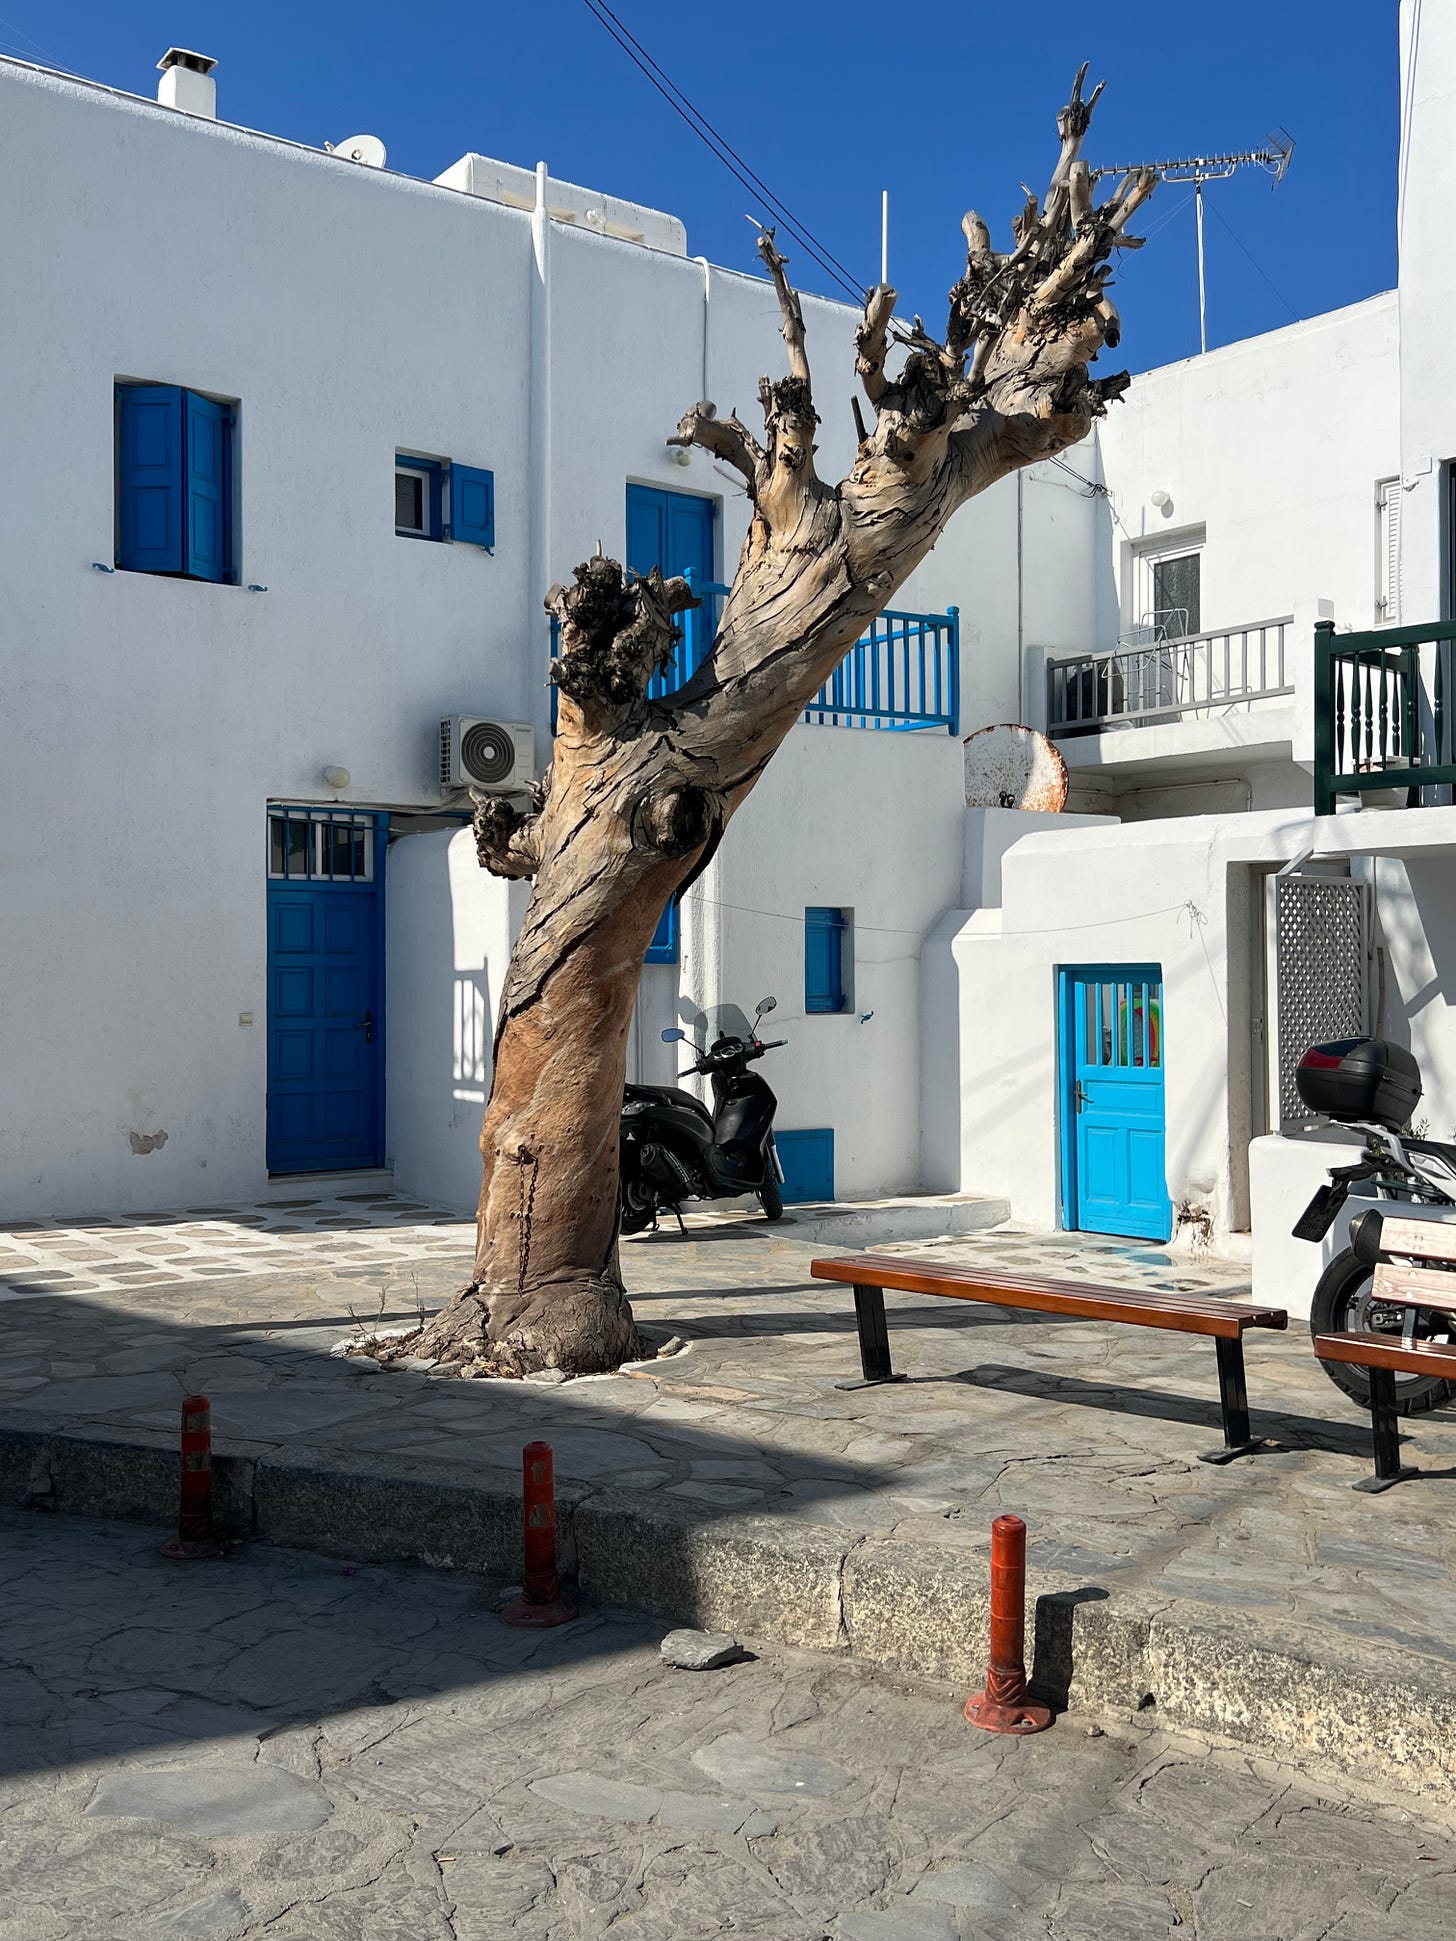 An interesting tree without leaves in a courtyard in Mykonos